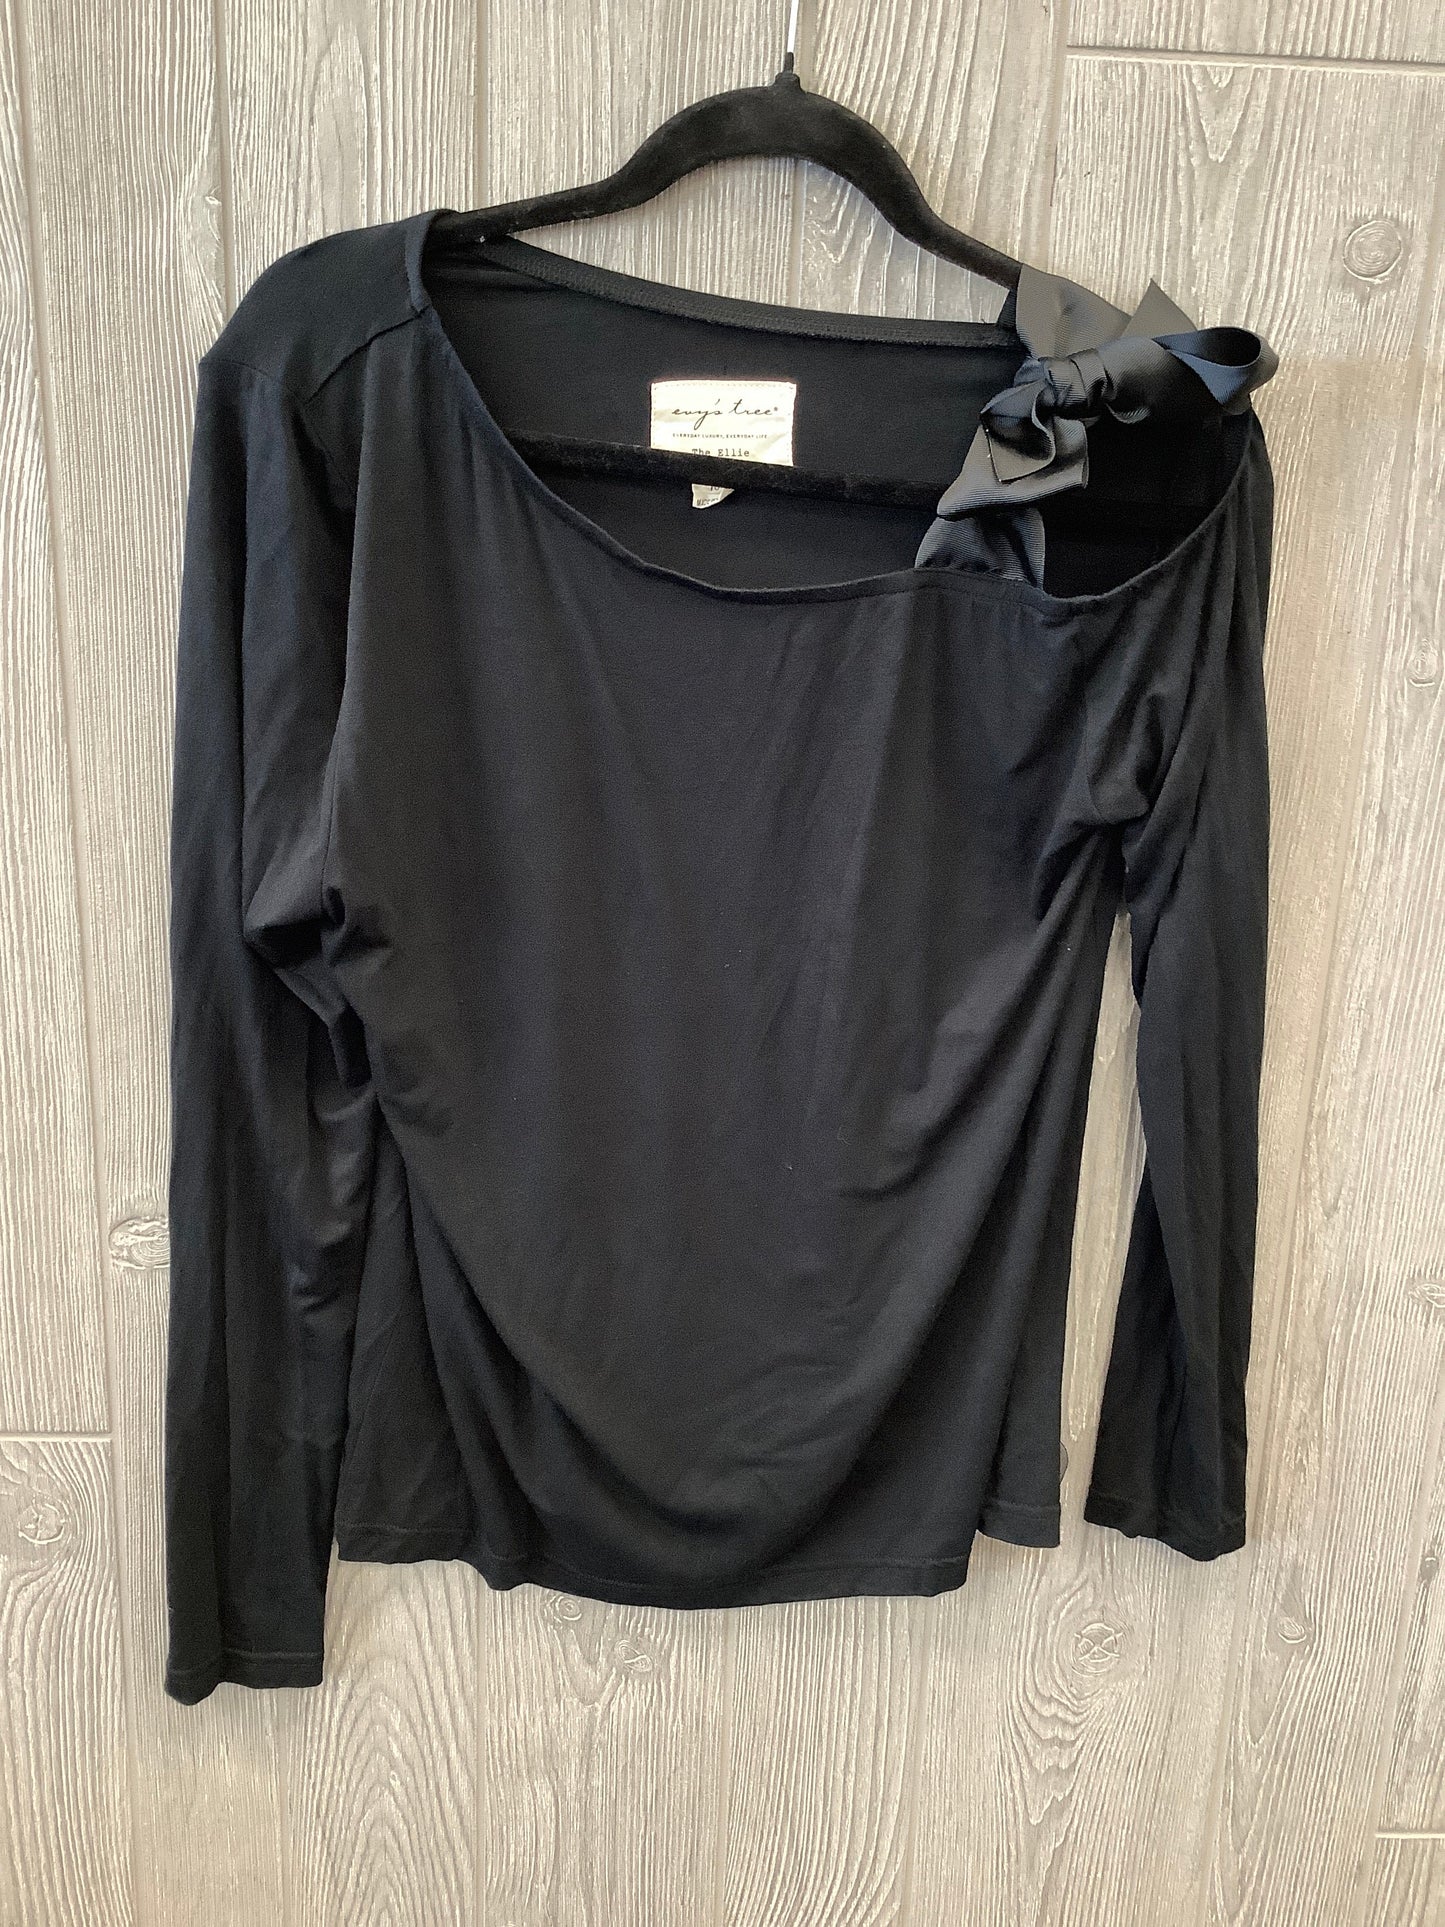 Black Top Long Sleeve Clothes Mentor, Size M